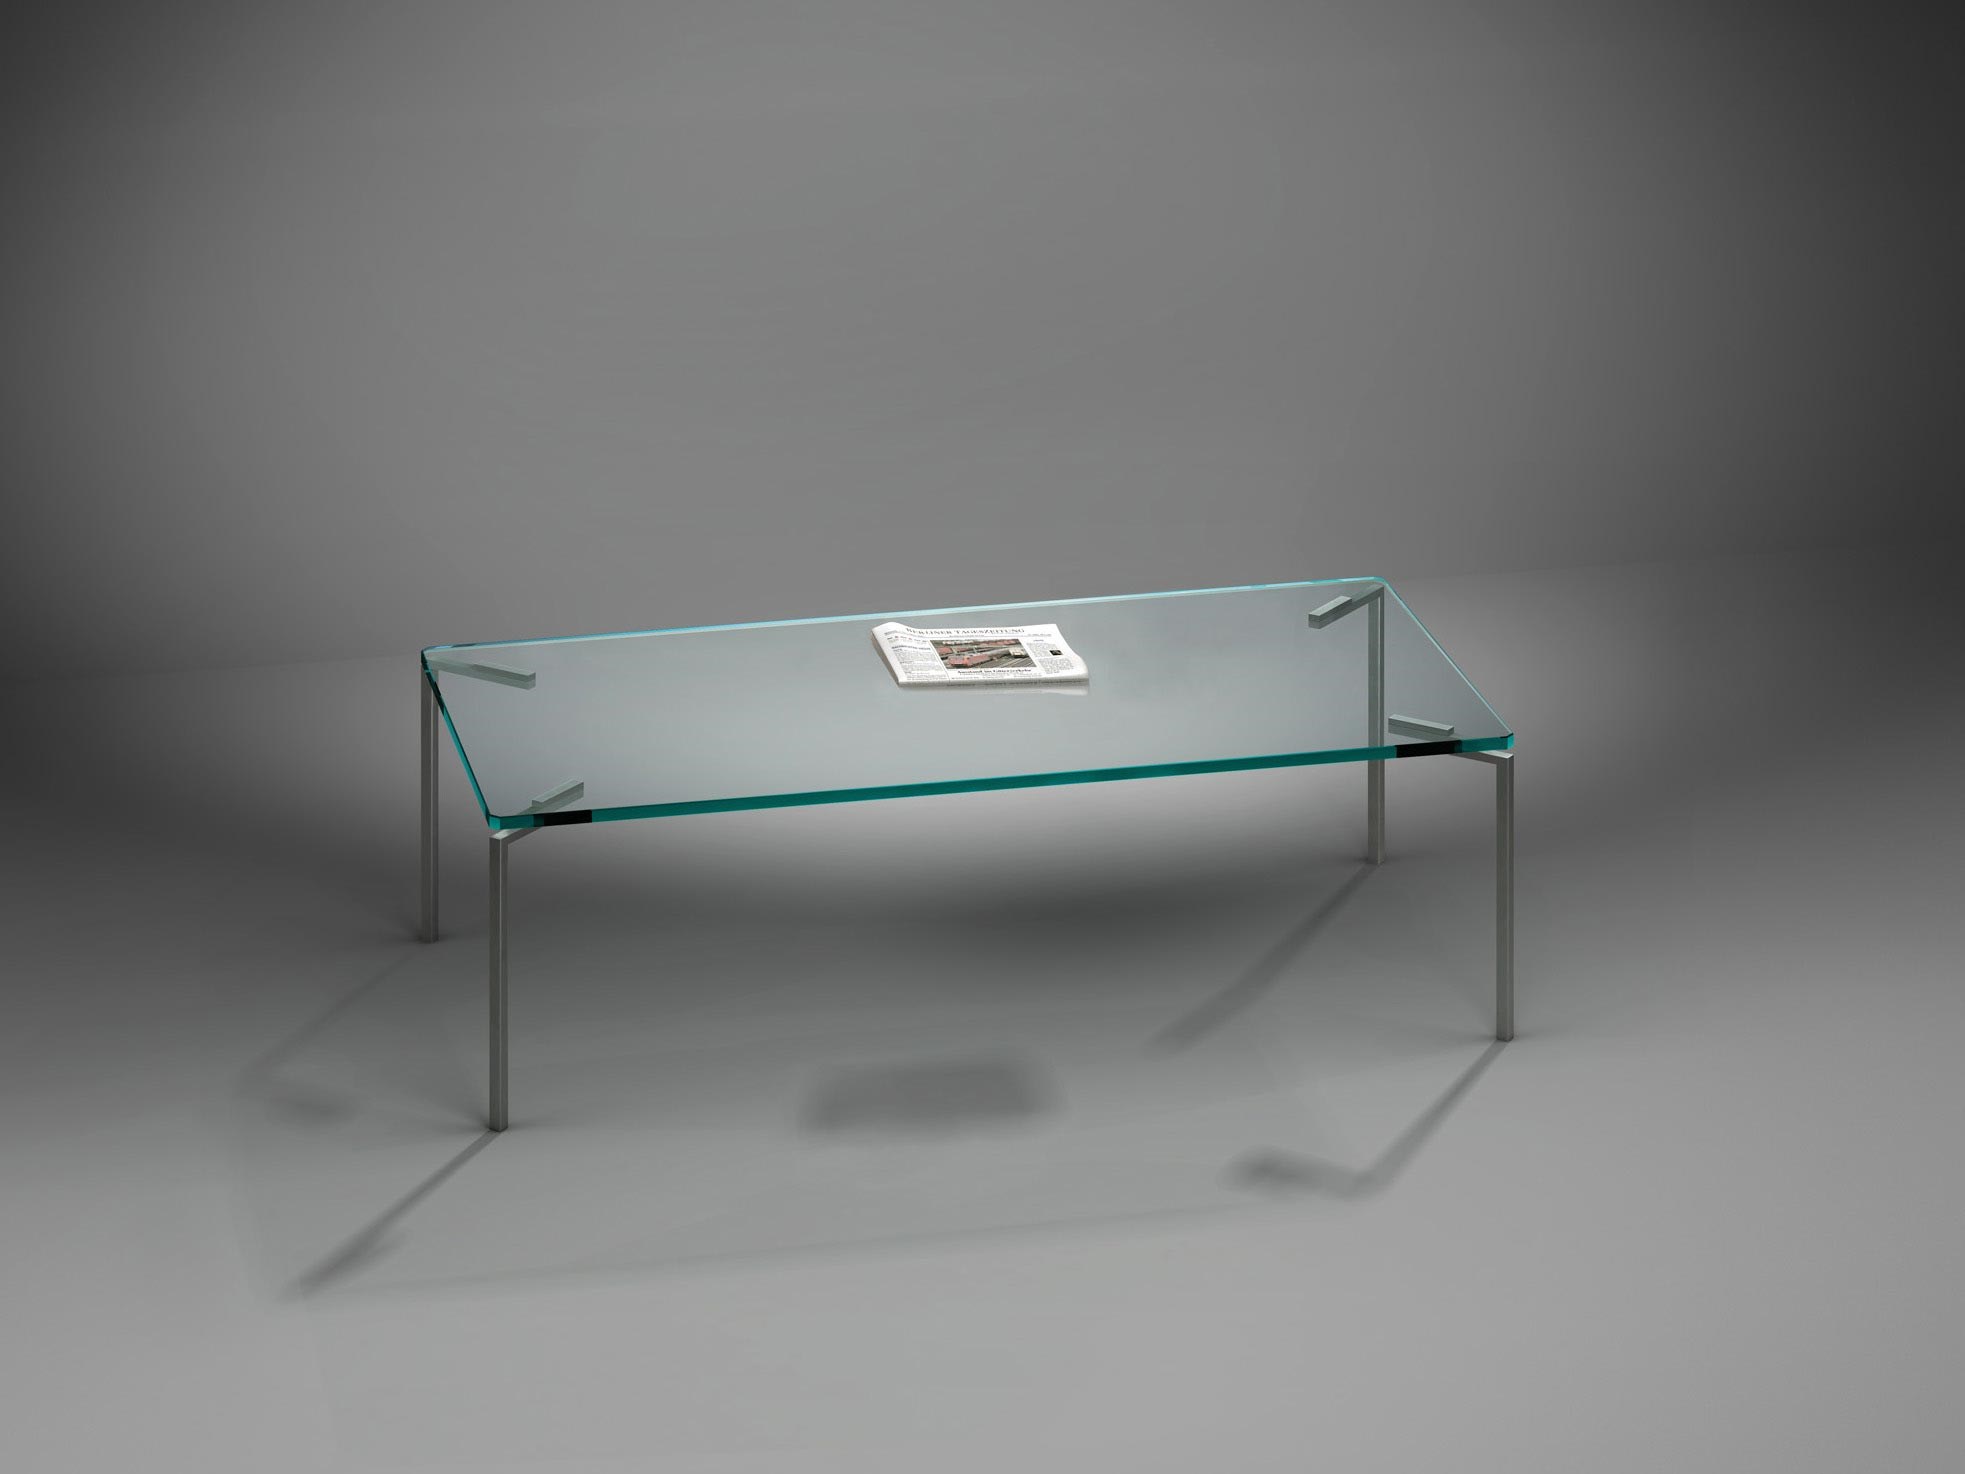 Glass cocktail table FILIO by DREIECK DESIGN: FI 2636 - OPTIWHITE clear - table feet stainless steel brushed